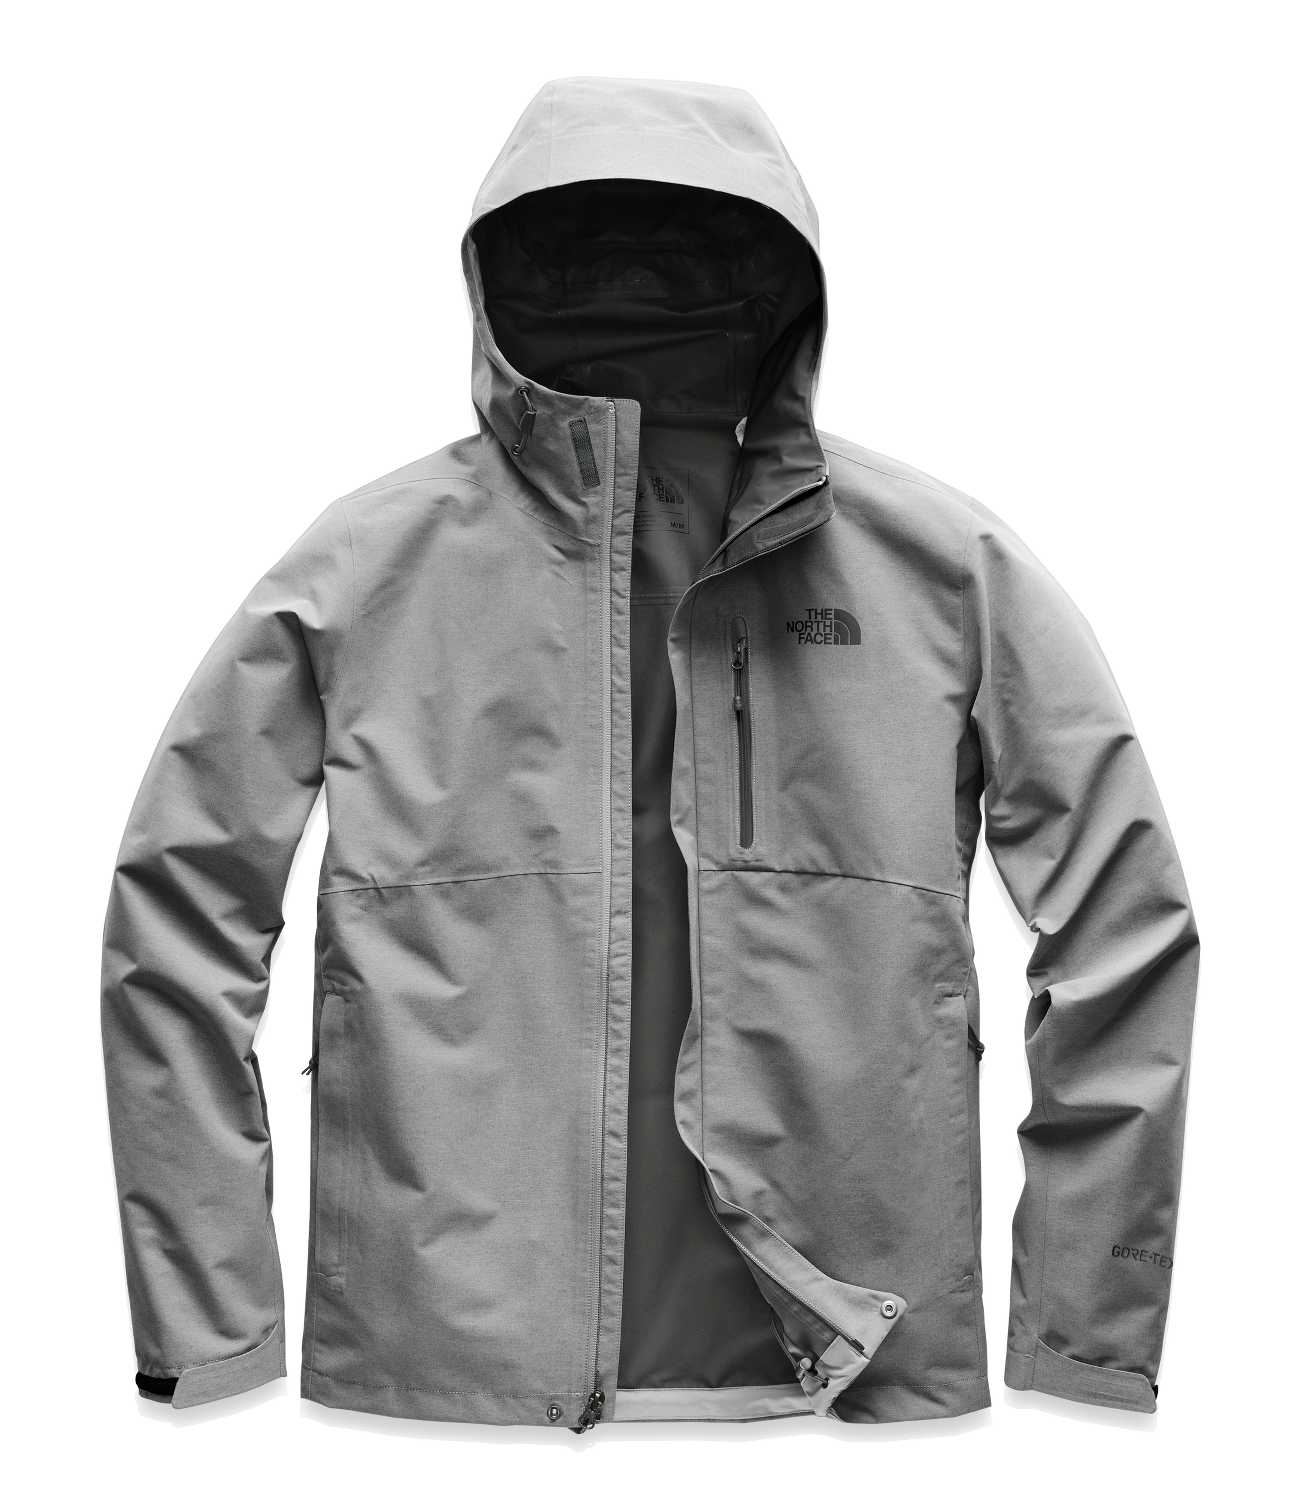 MEN'S DRYZZLE JACKET | The North Face | The North Face Renewed